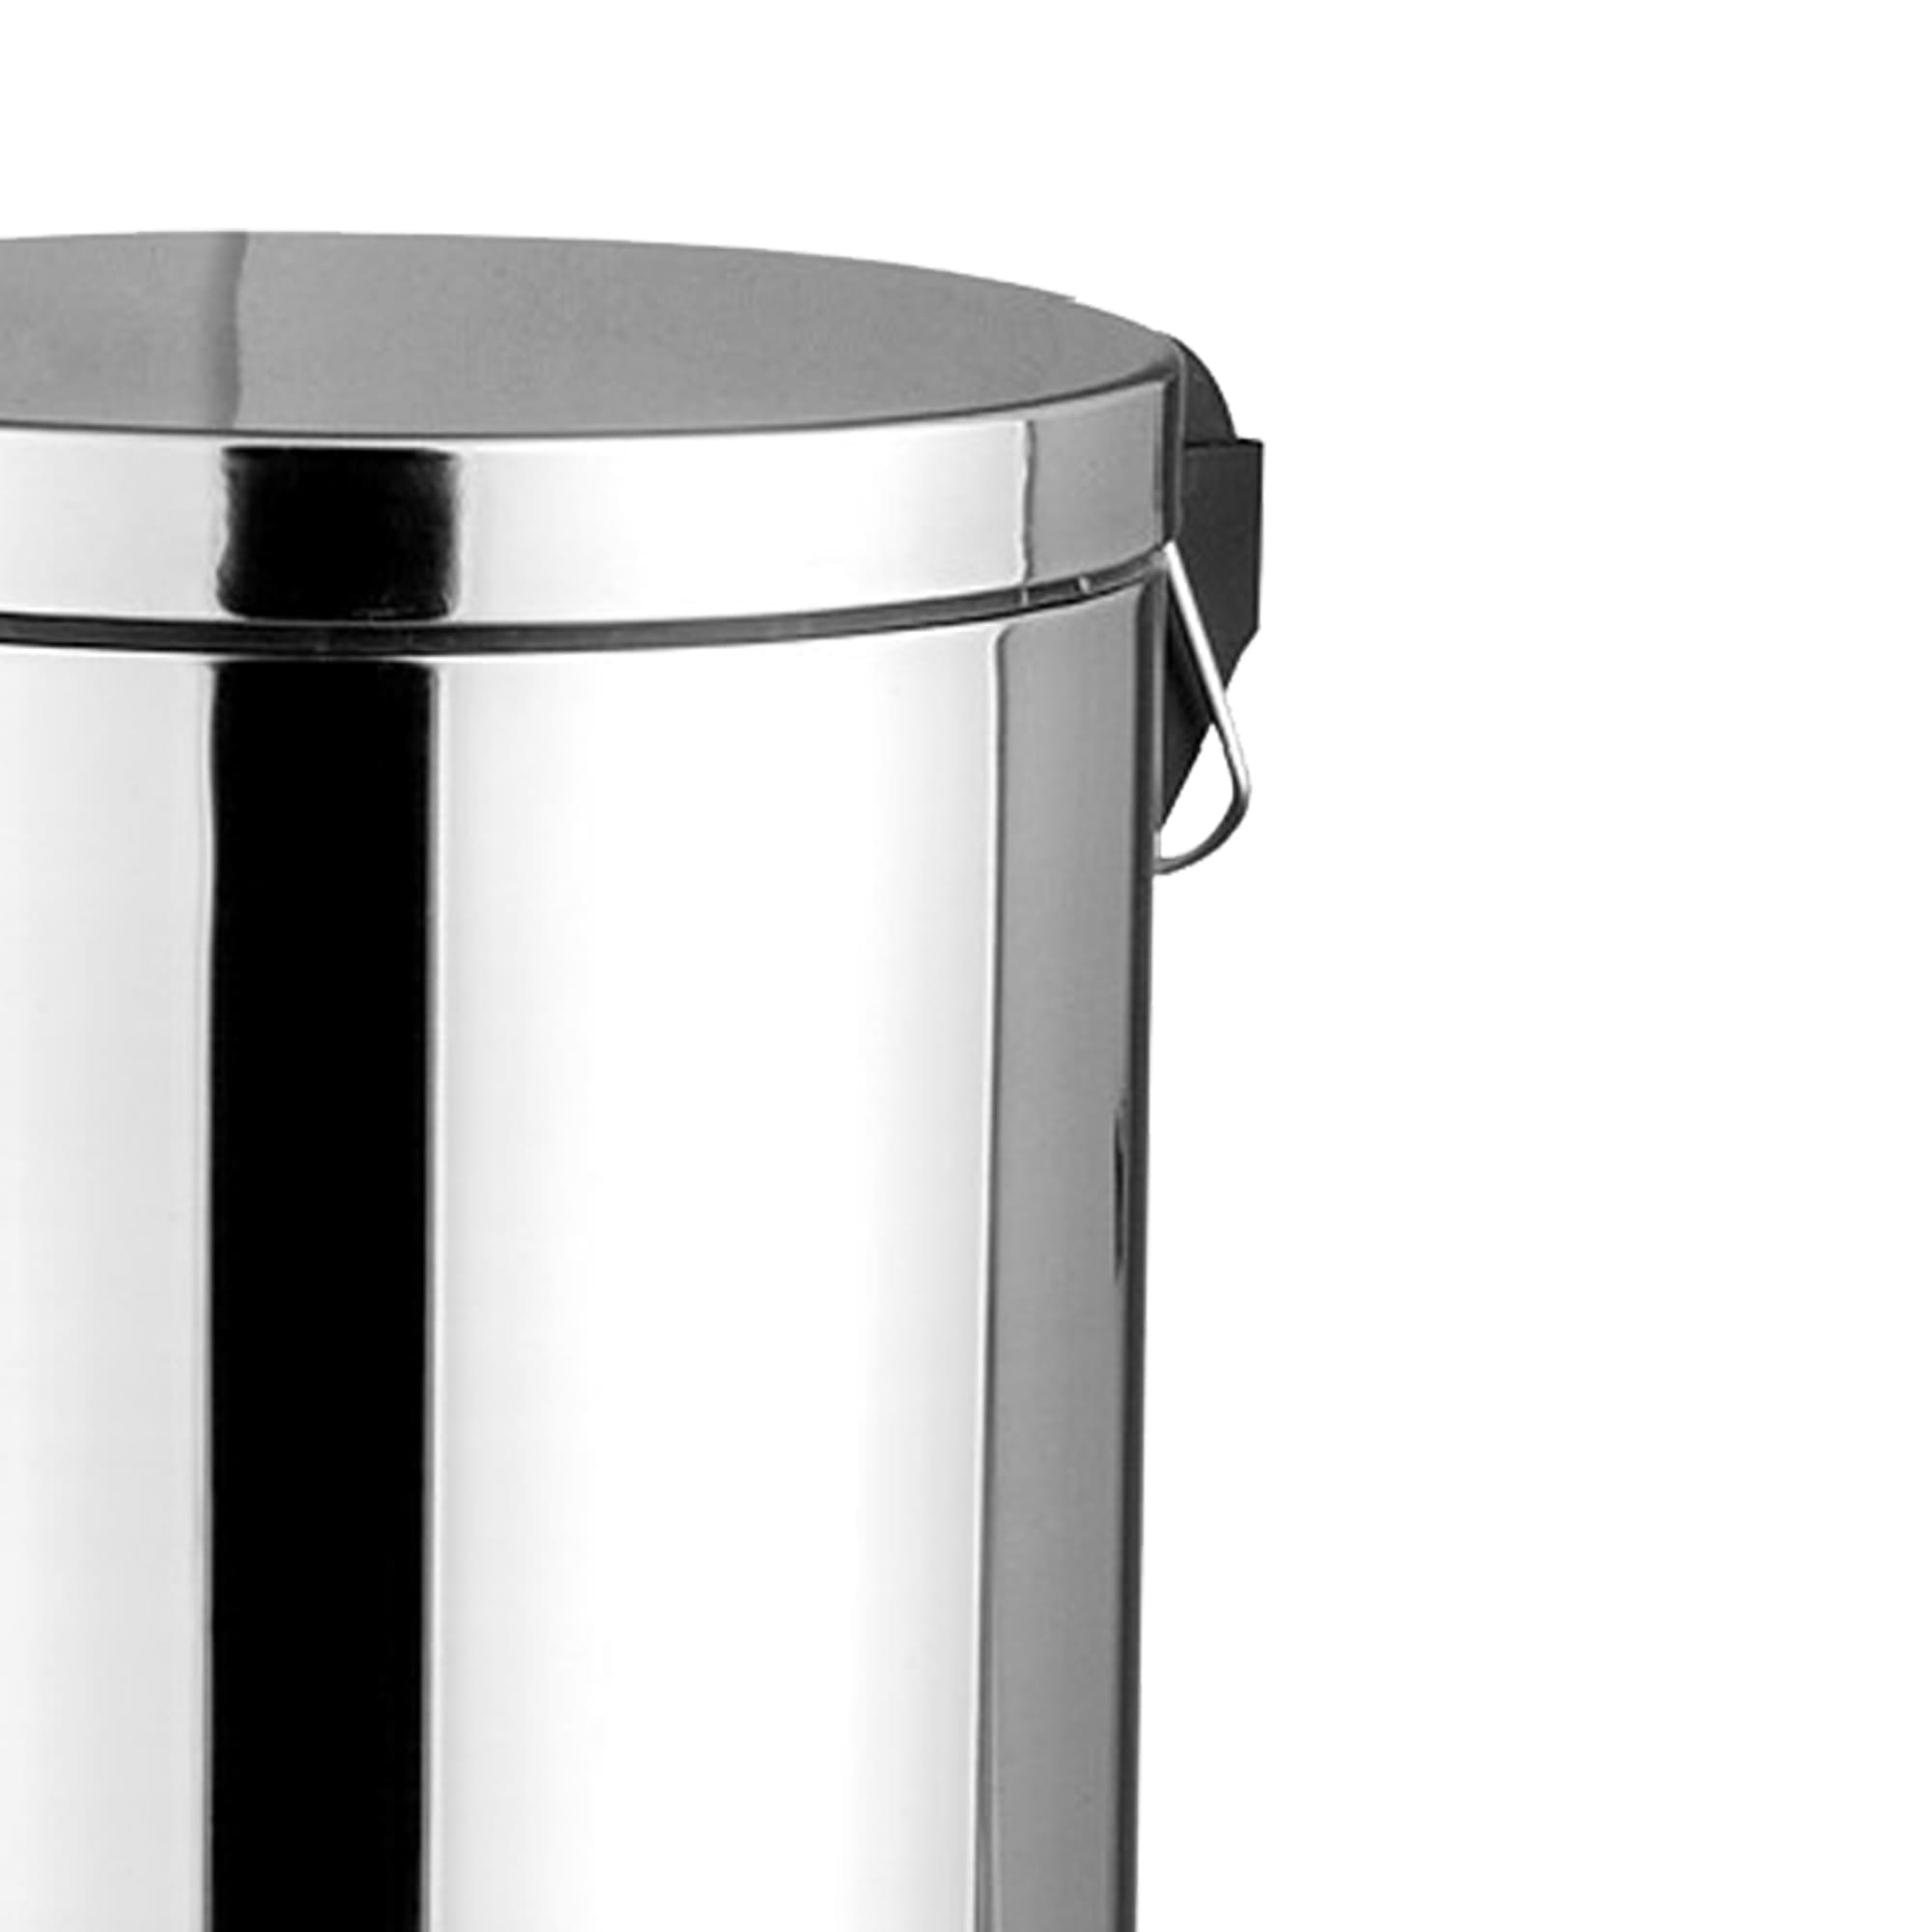 Home Basics 30 Liter Polished Stainless Steel Round Waste Bin, Silver $30.00 EACH, CASE PACK OF 2